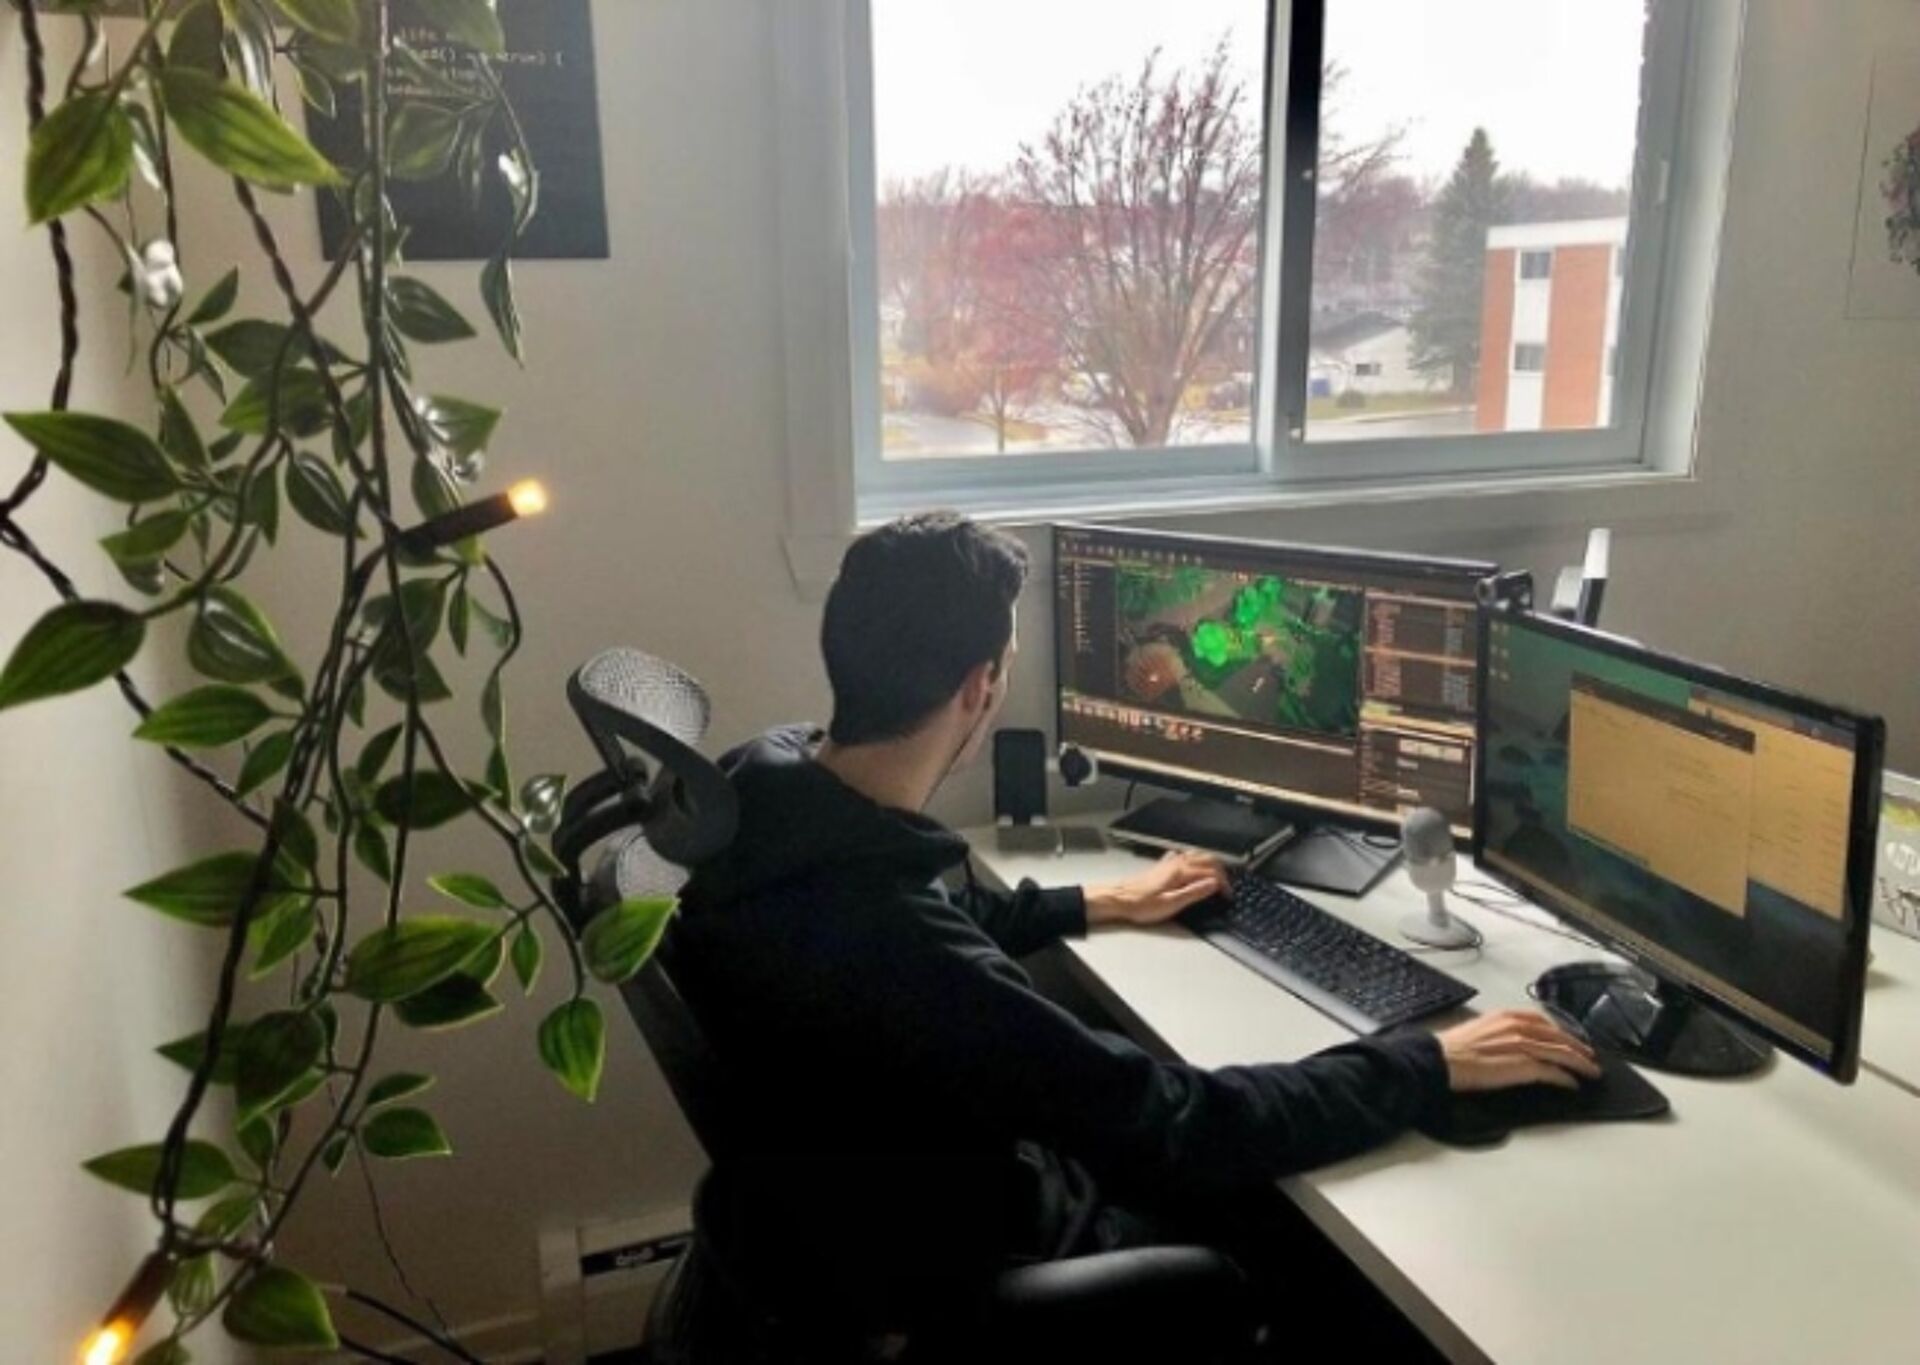 A programmer works intently in a well-lit home office setup with dual monitors and a view outside.